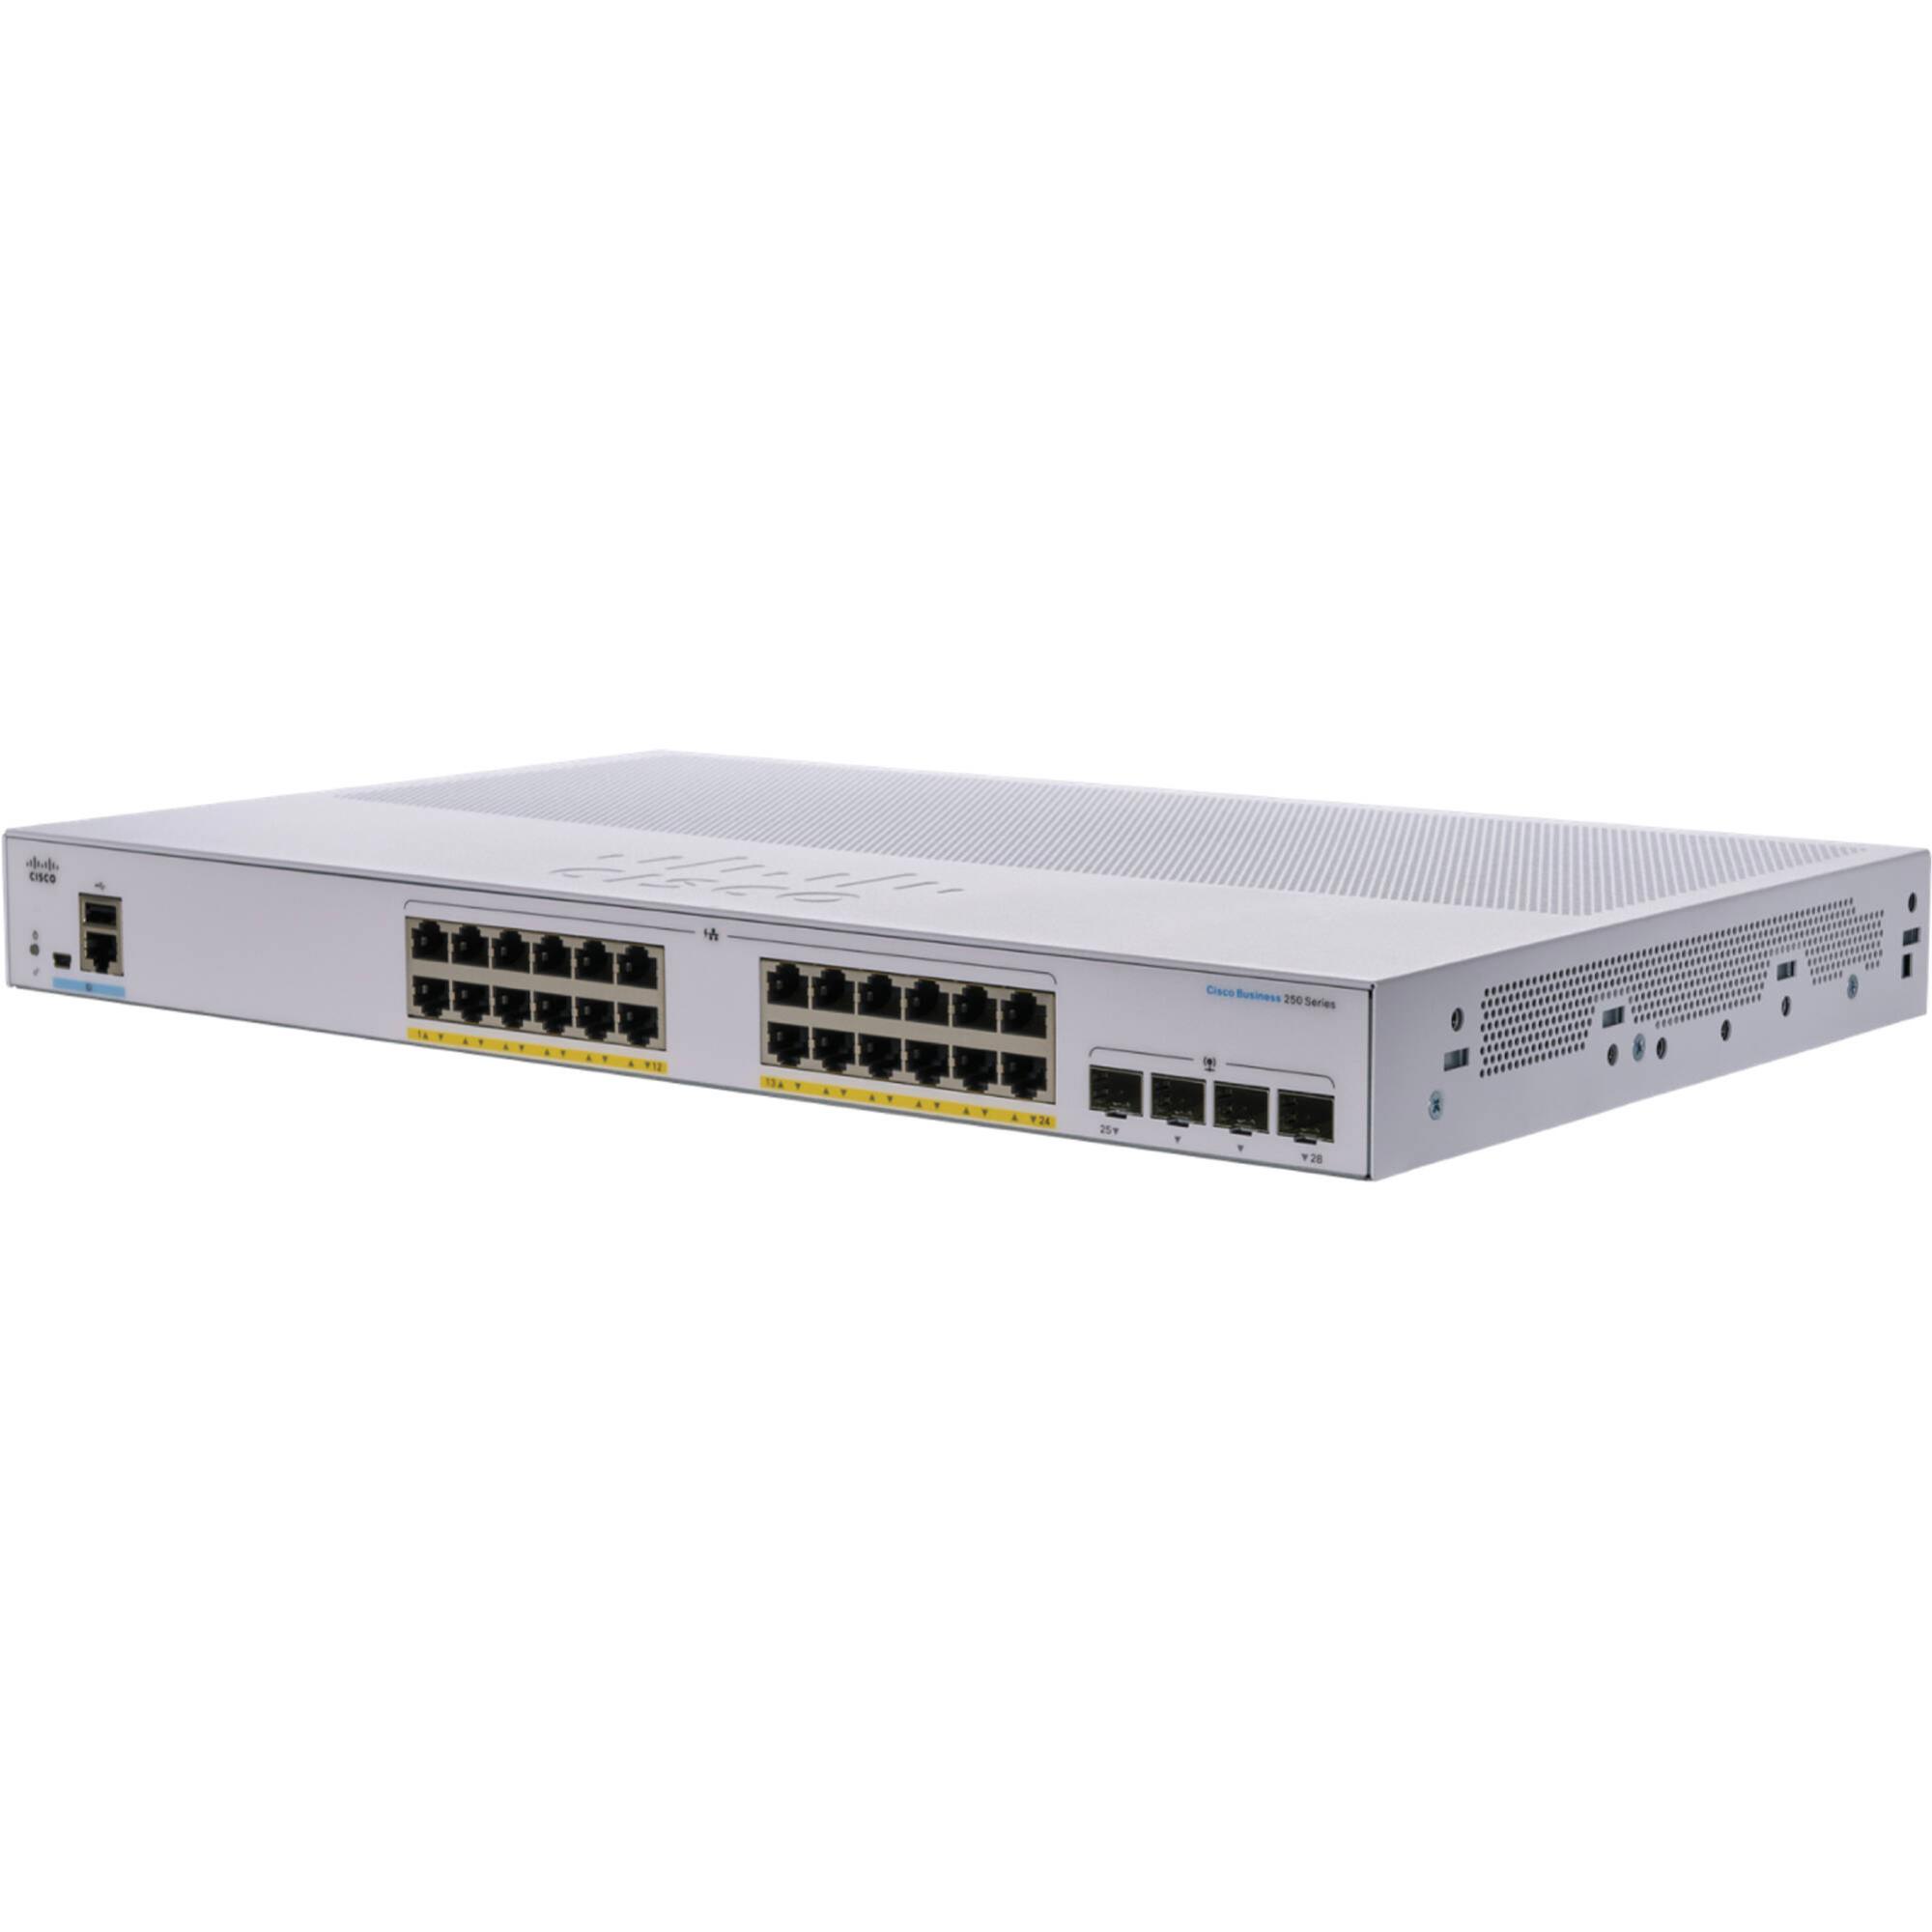  Managed POE SWITCH: 24-Port Gigabit Smart Switch with 24 PoE RJ45 and 4 SFP Ports Business 250 Series, 195W  